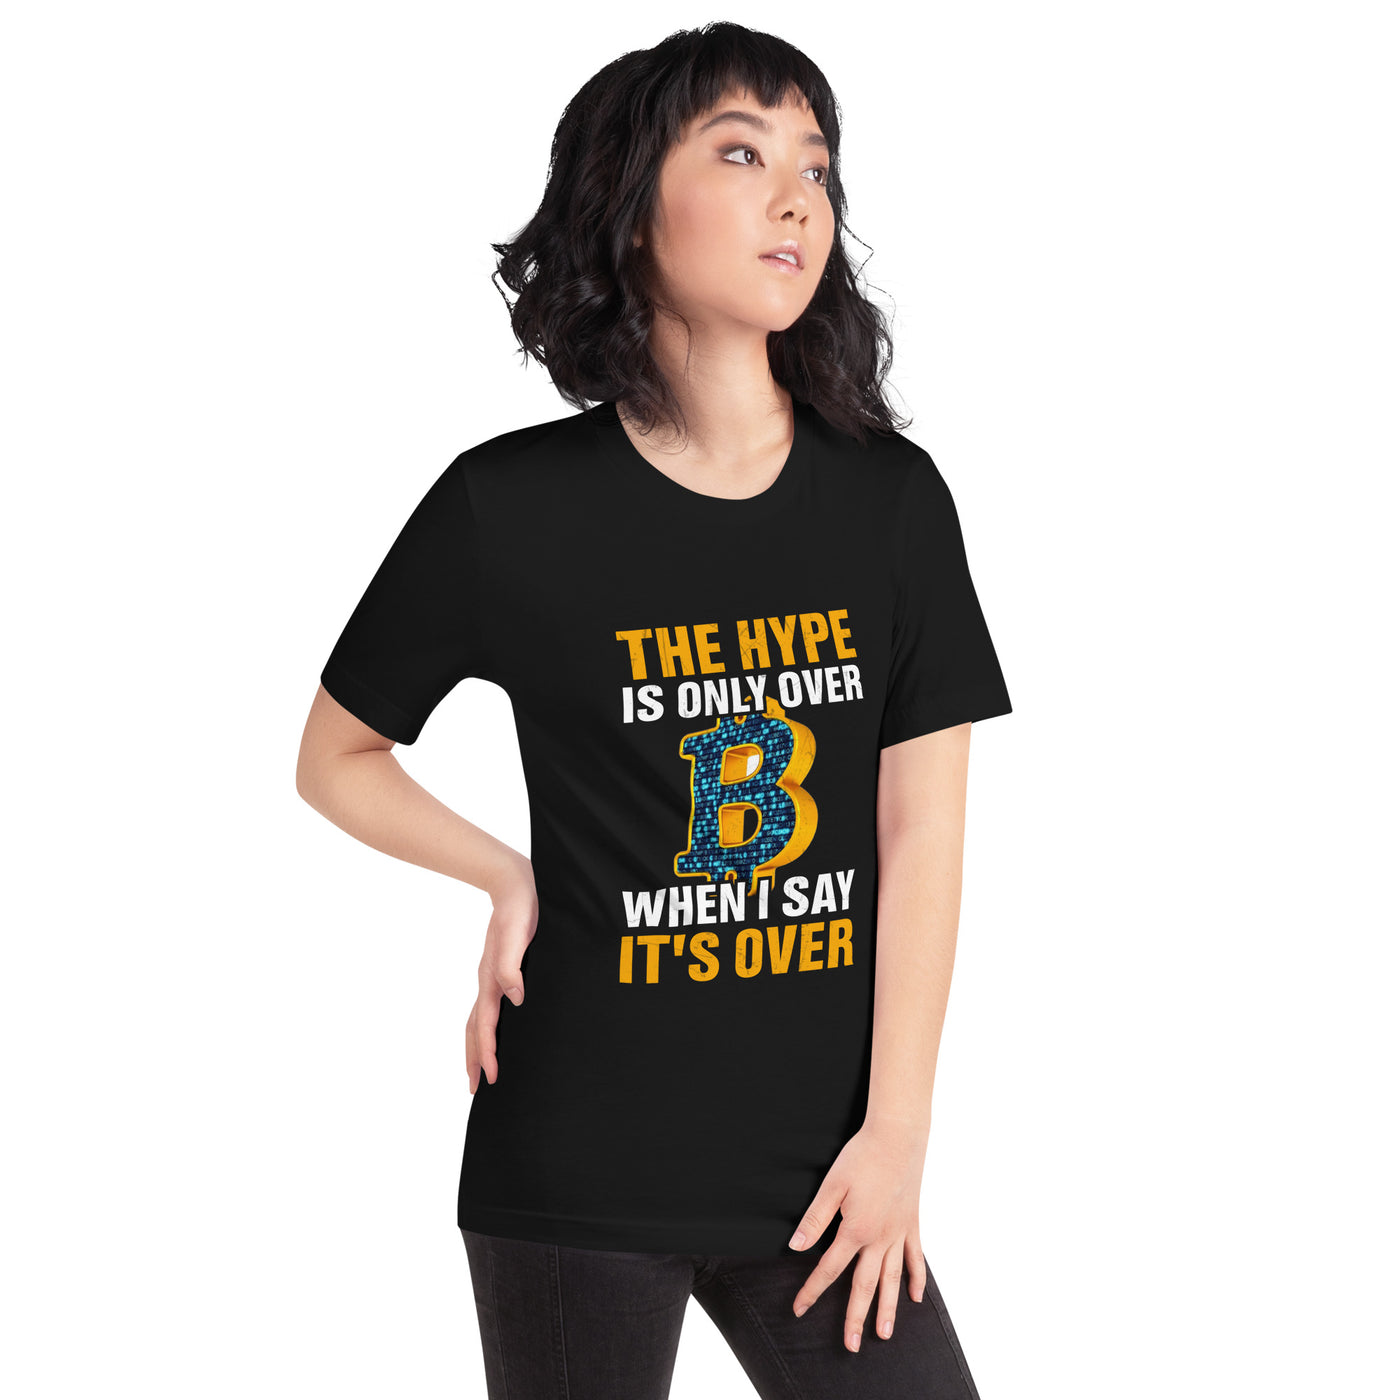 Bitcoin: The Hype is only over, when I said it's over - Unisex t-shirt